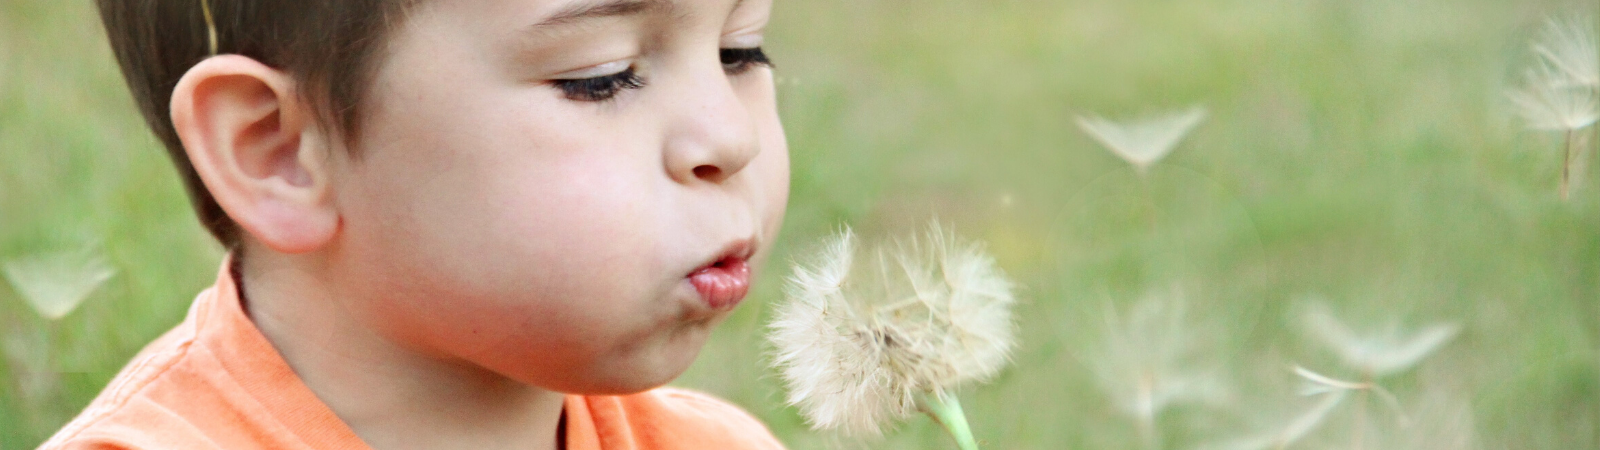 Child blowing a dandelion seeds into the air.